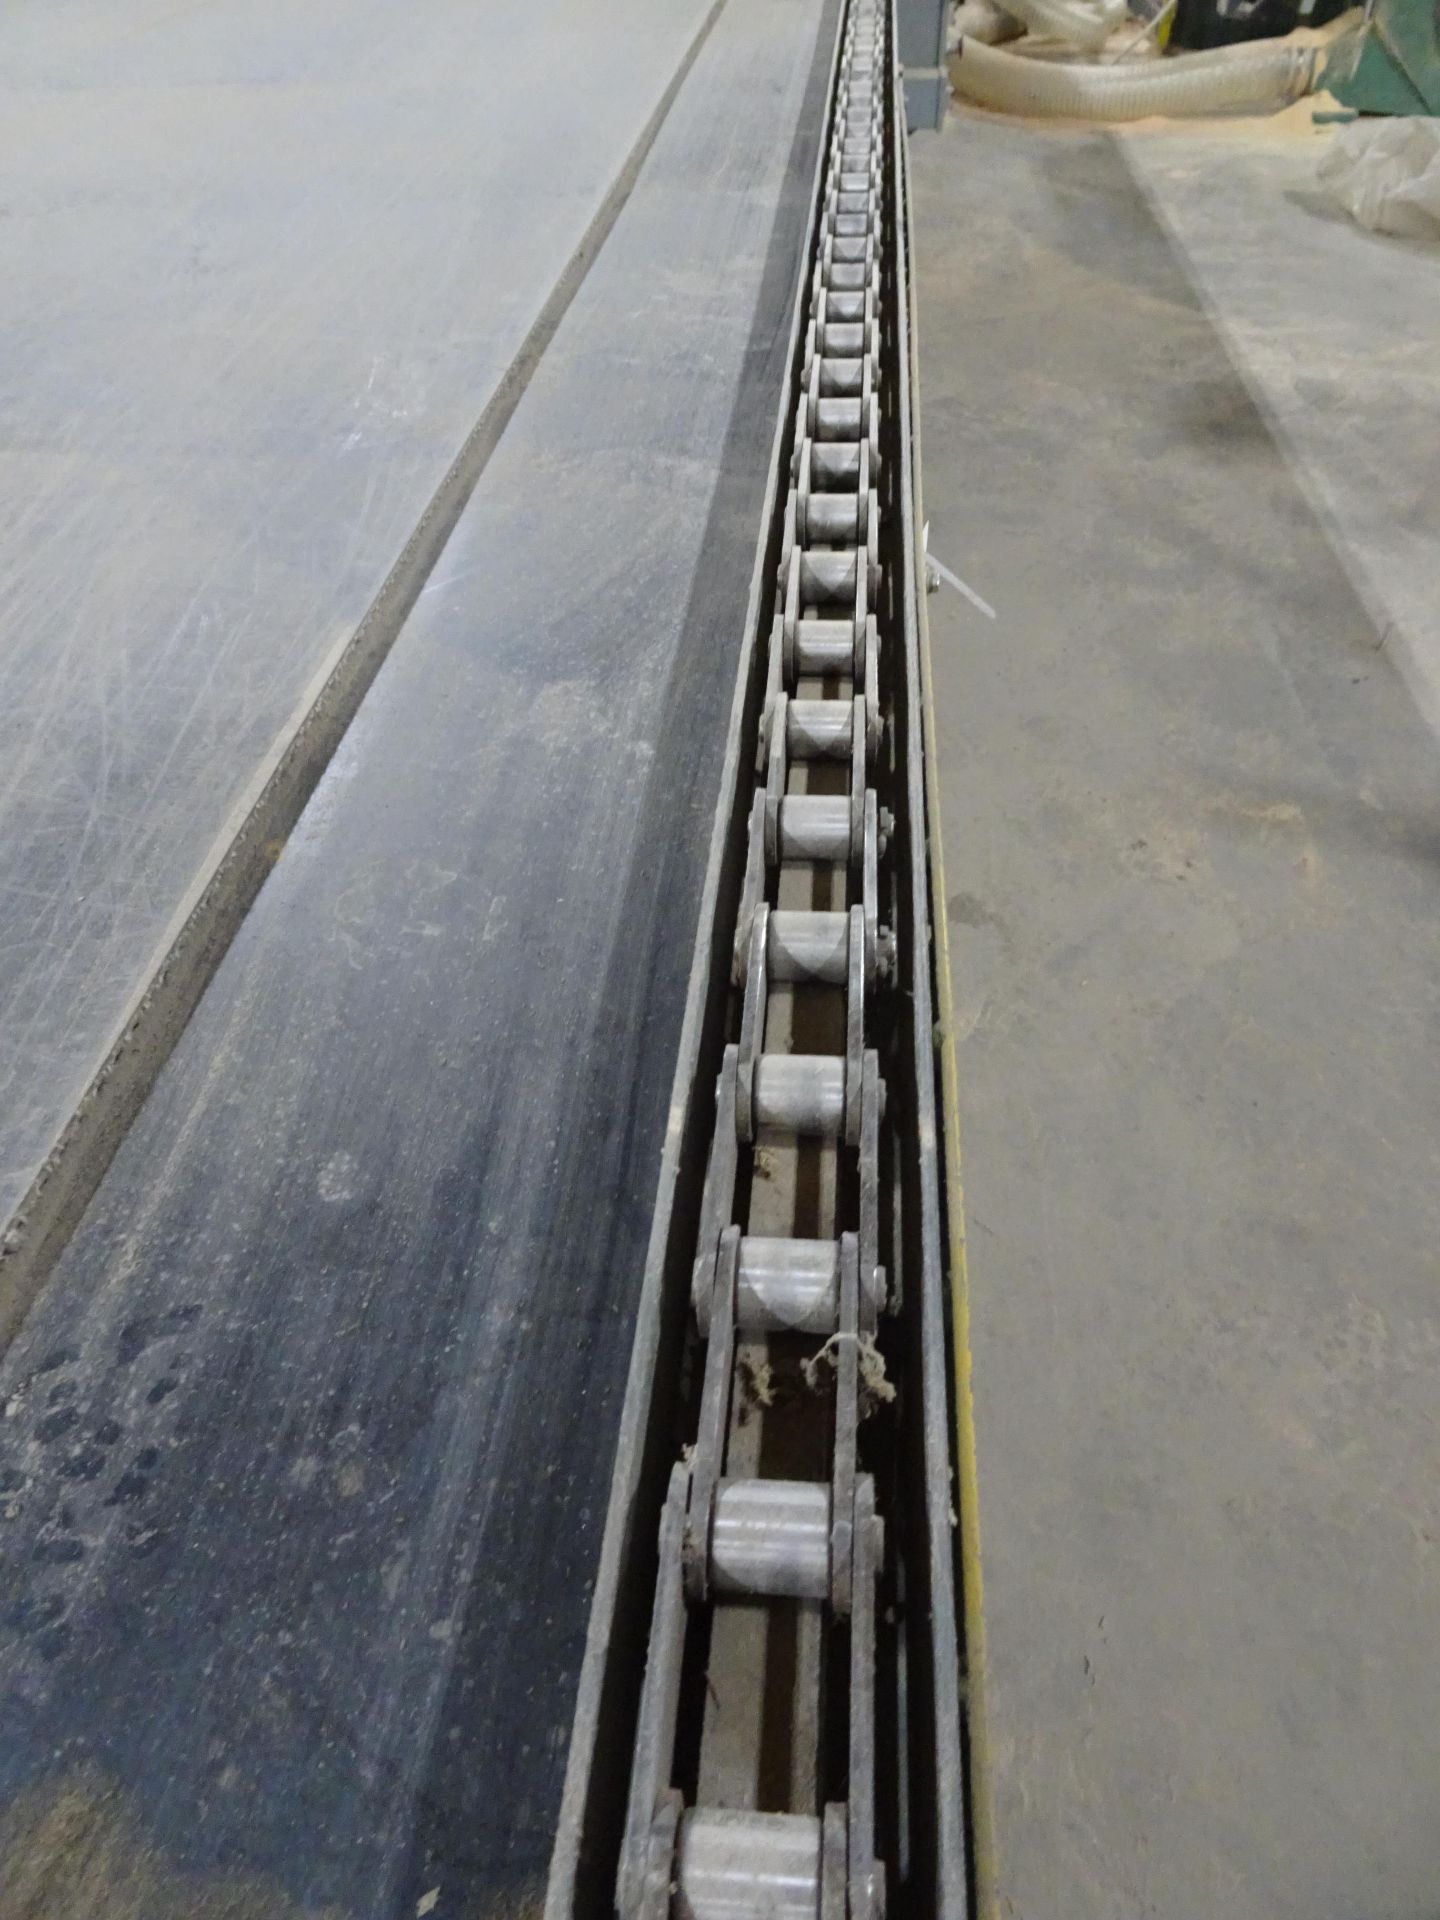 60' x 10' Wood Drag Chain and Belt , Location: DM Room - Image 3 of 4